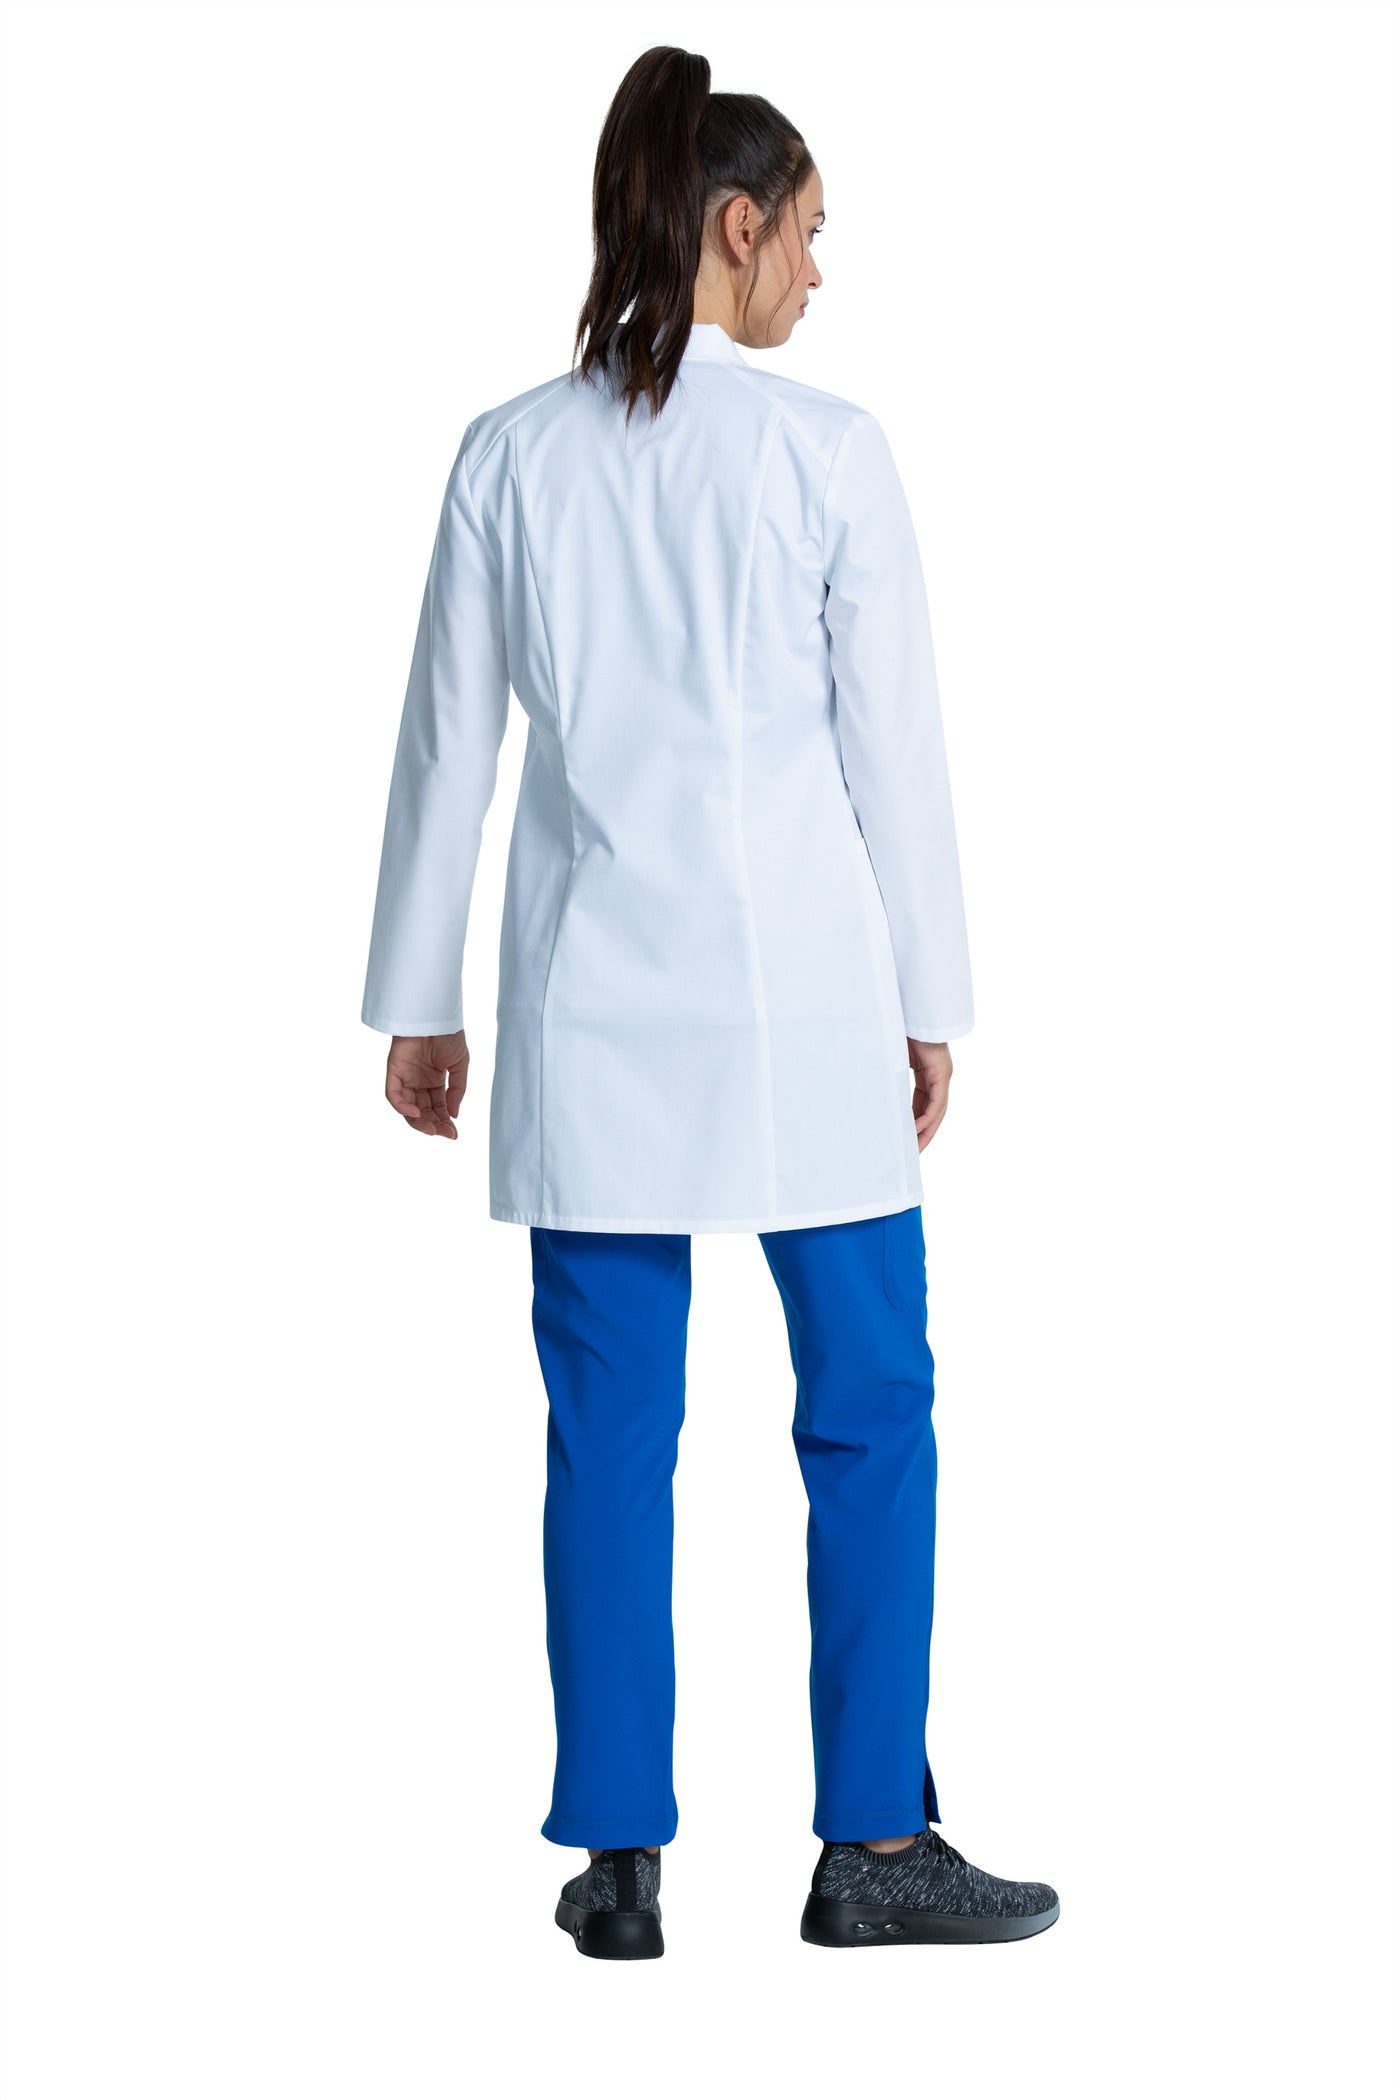 White - Project Lab by Cherokee 33" Women's Lab Coat